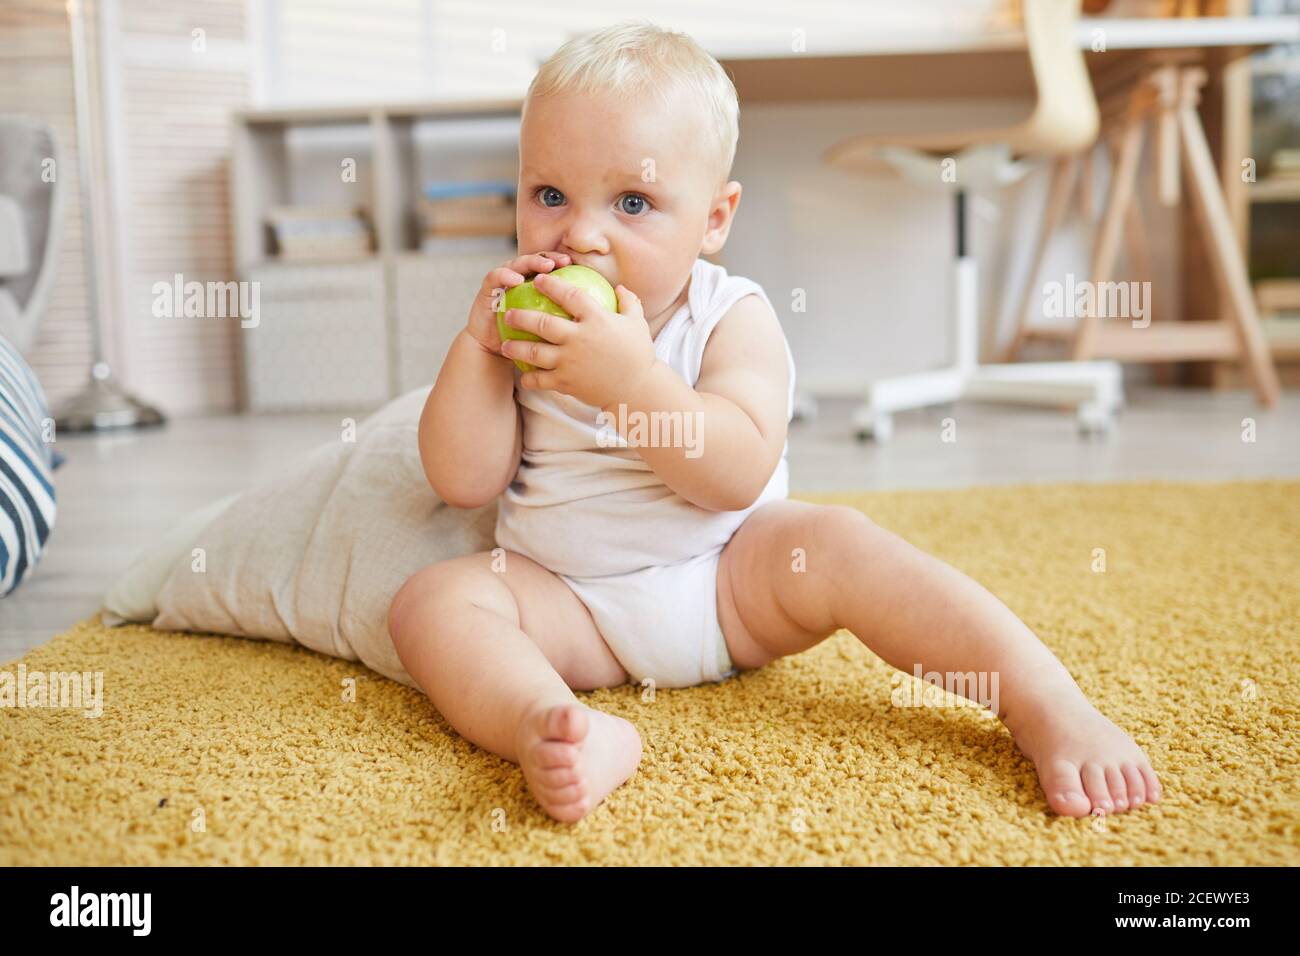 Horizontal full body shot of baby sitting on carpet biting and eating green apple, copy space Stock Photo